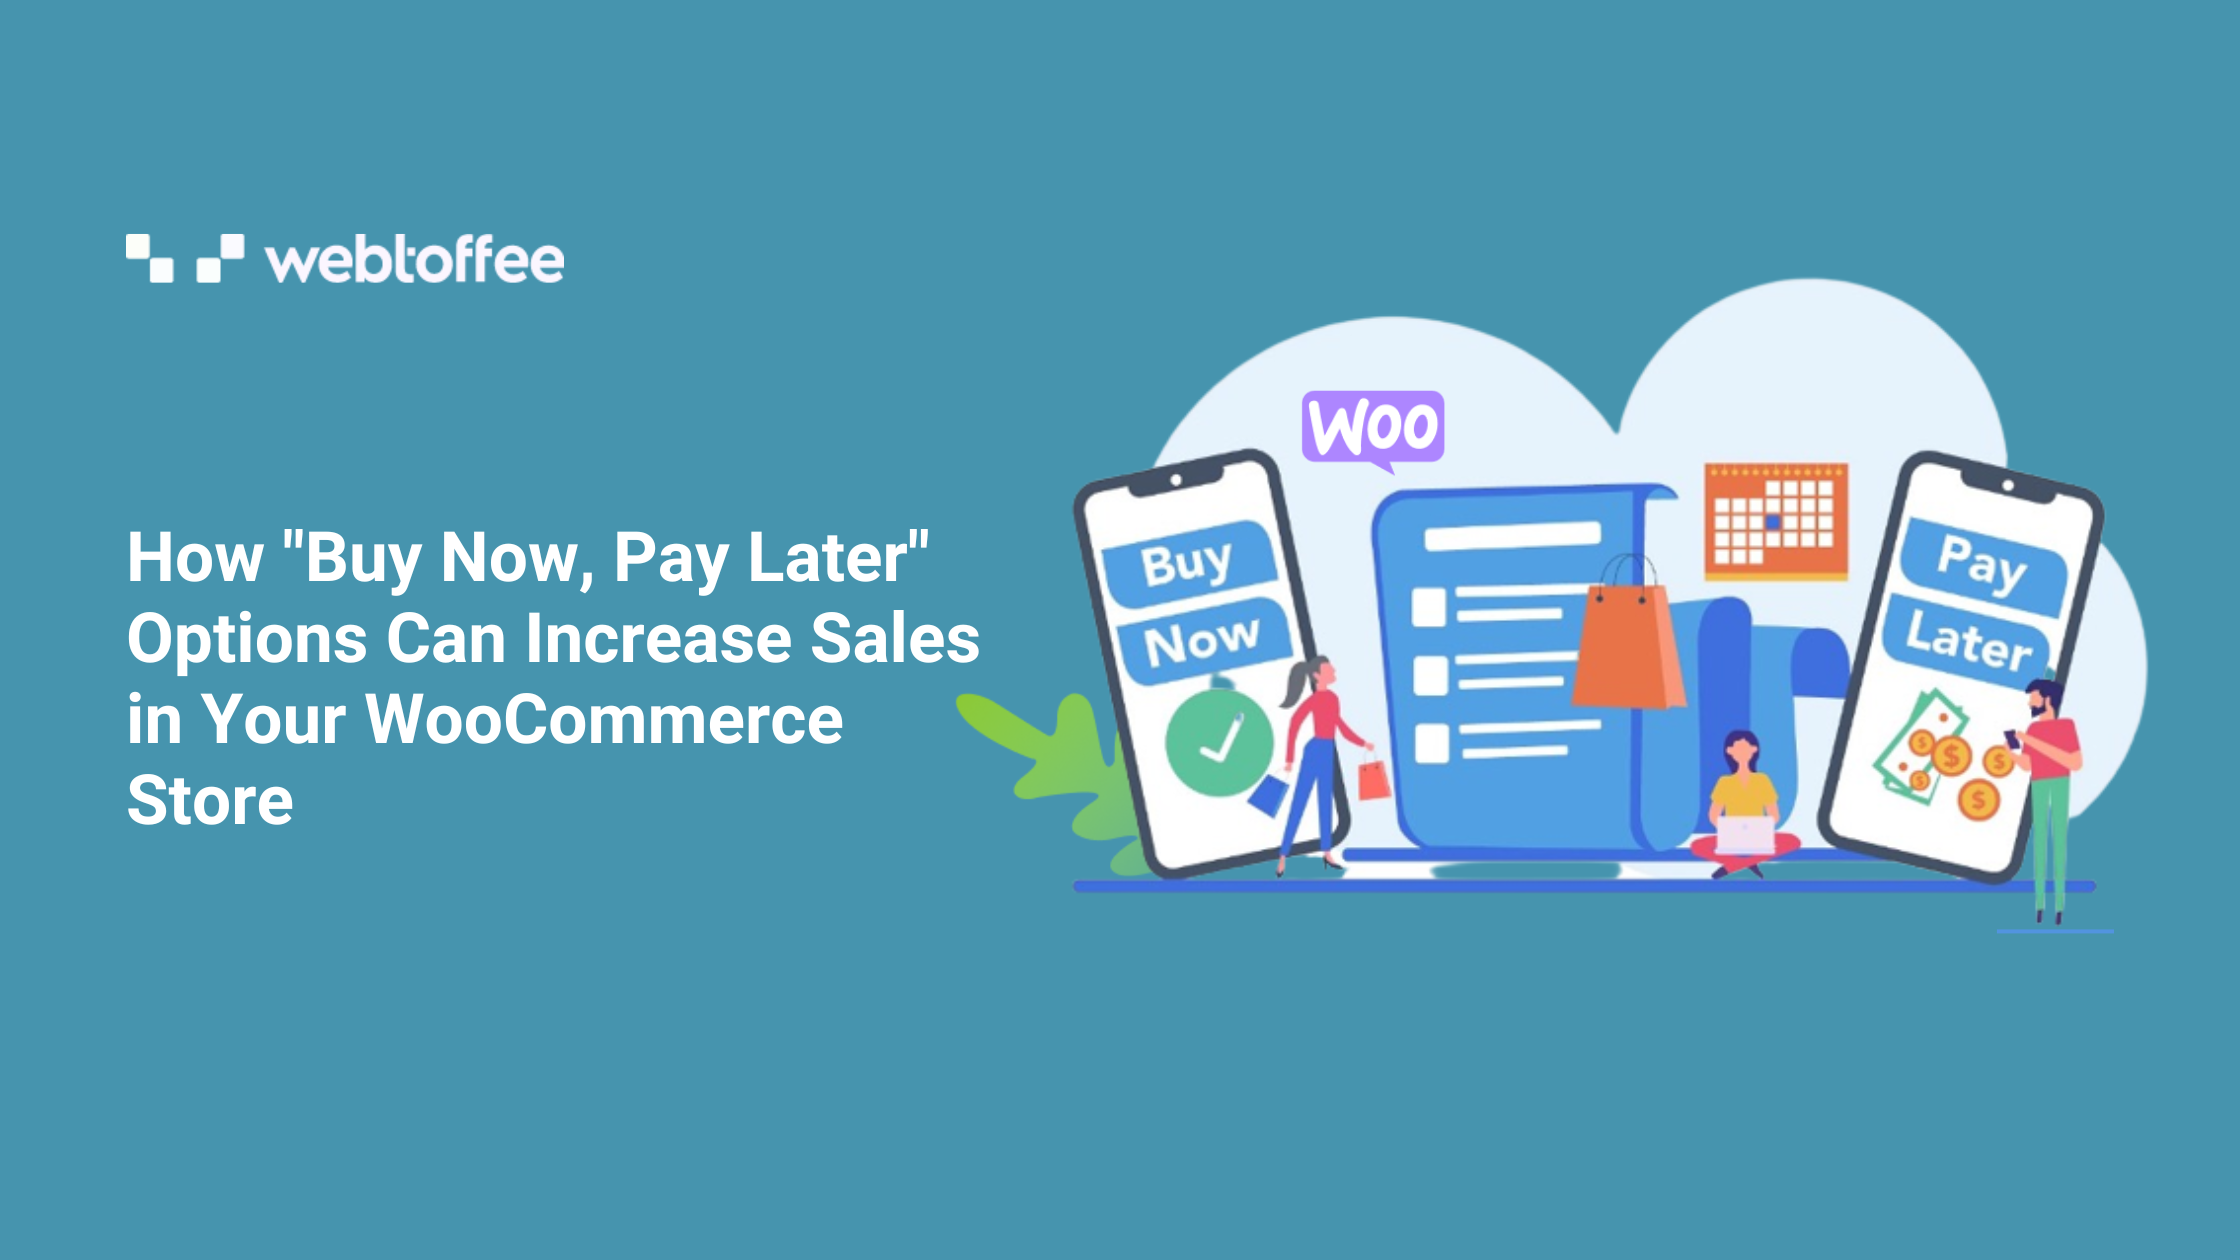 How 'Buy Now Pay Later' Can Increase Sales in WooCommerce? - WebToffee